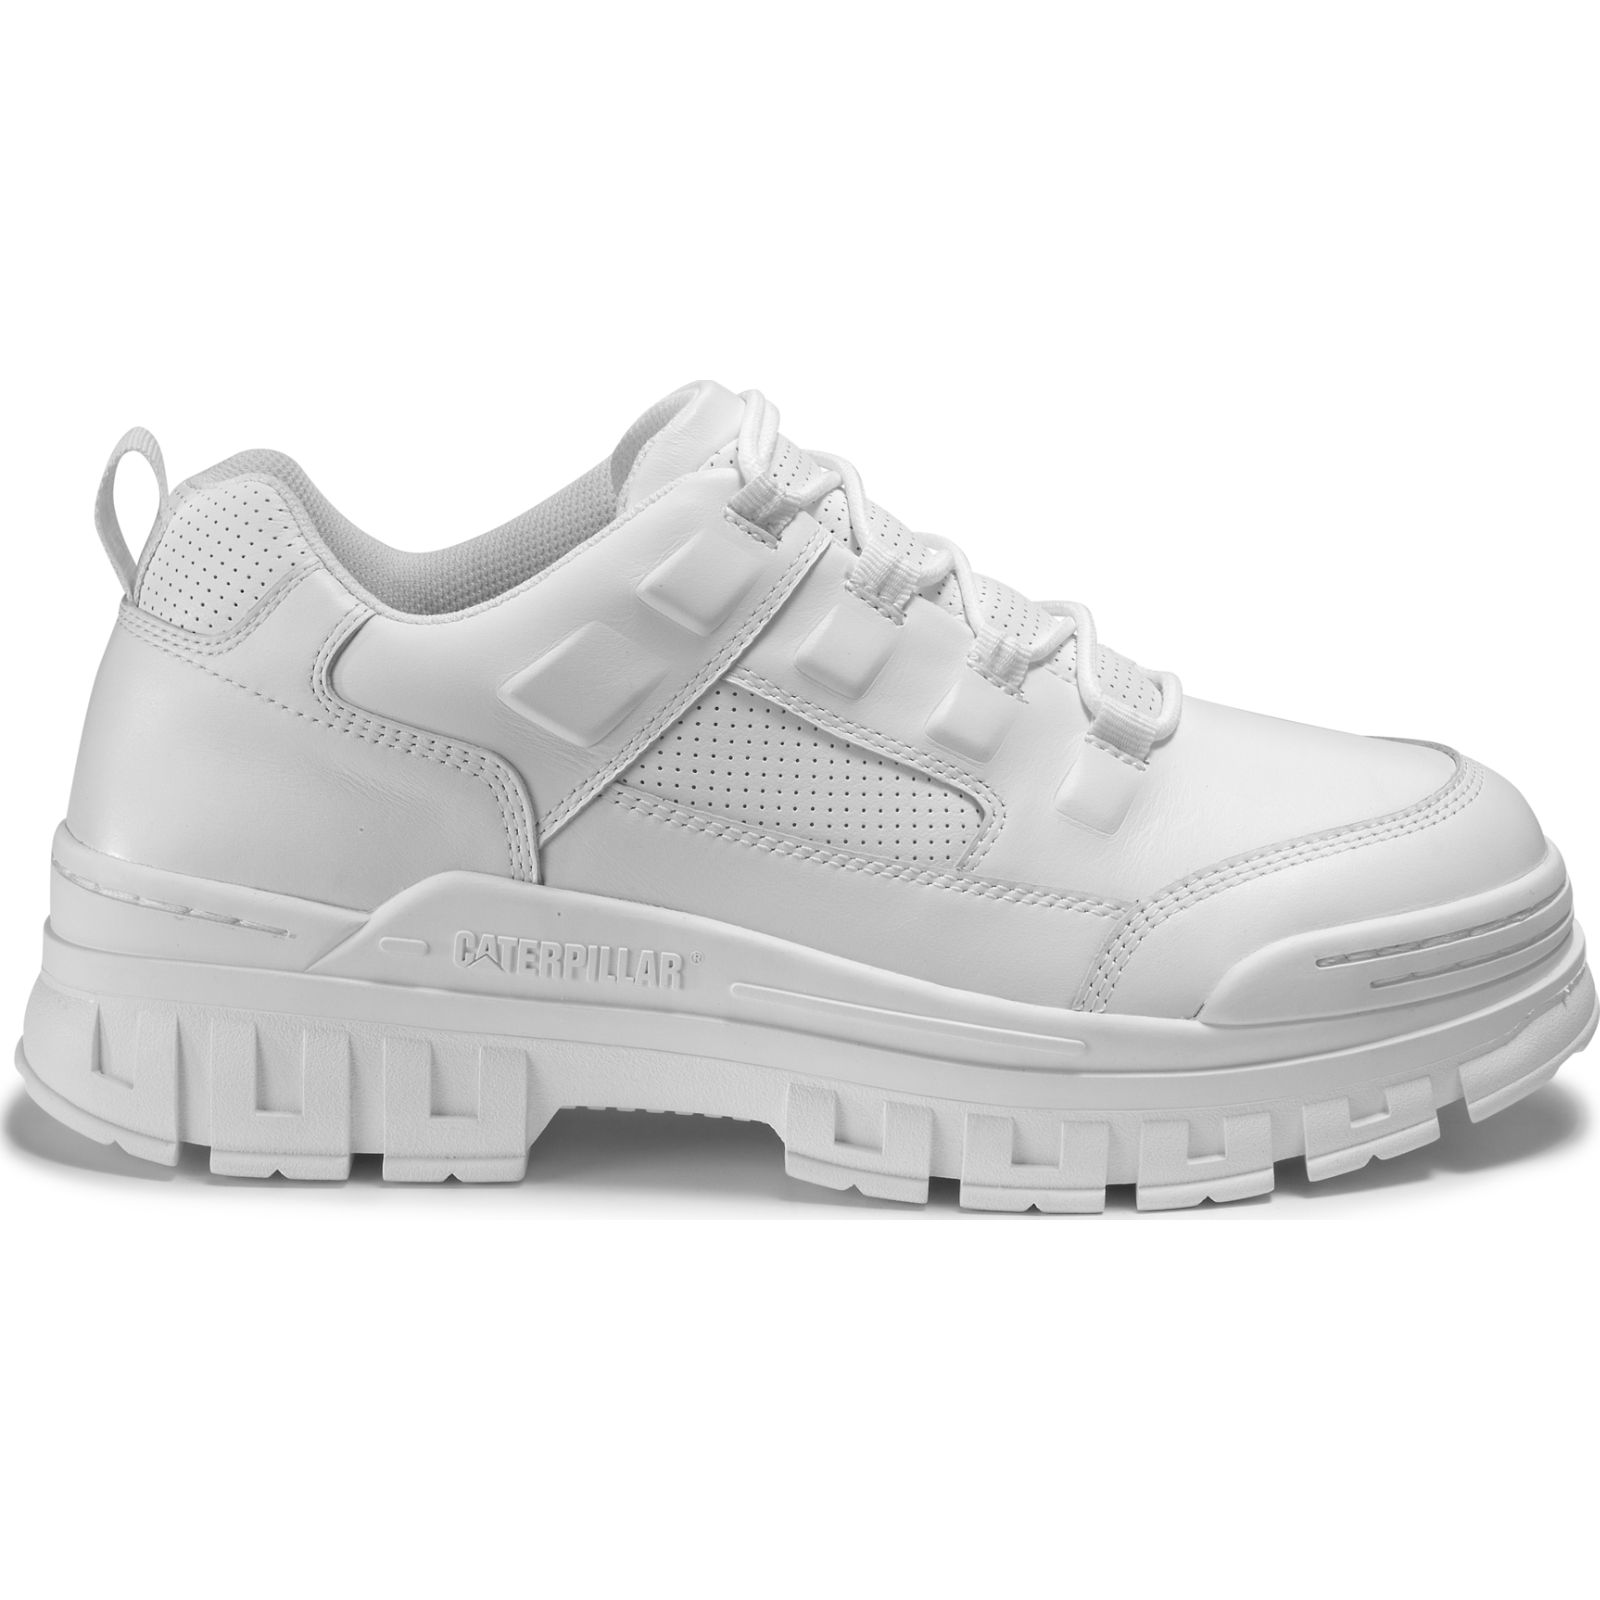 Caterpillar Shoes Sale - Caterpillar Rise Womens Casual Shoes White (849257-JHE)